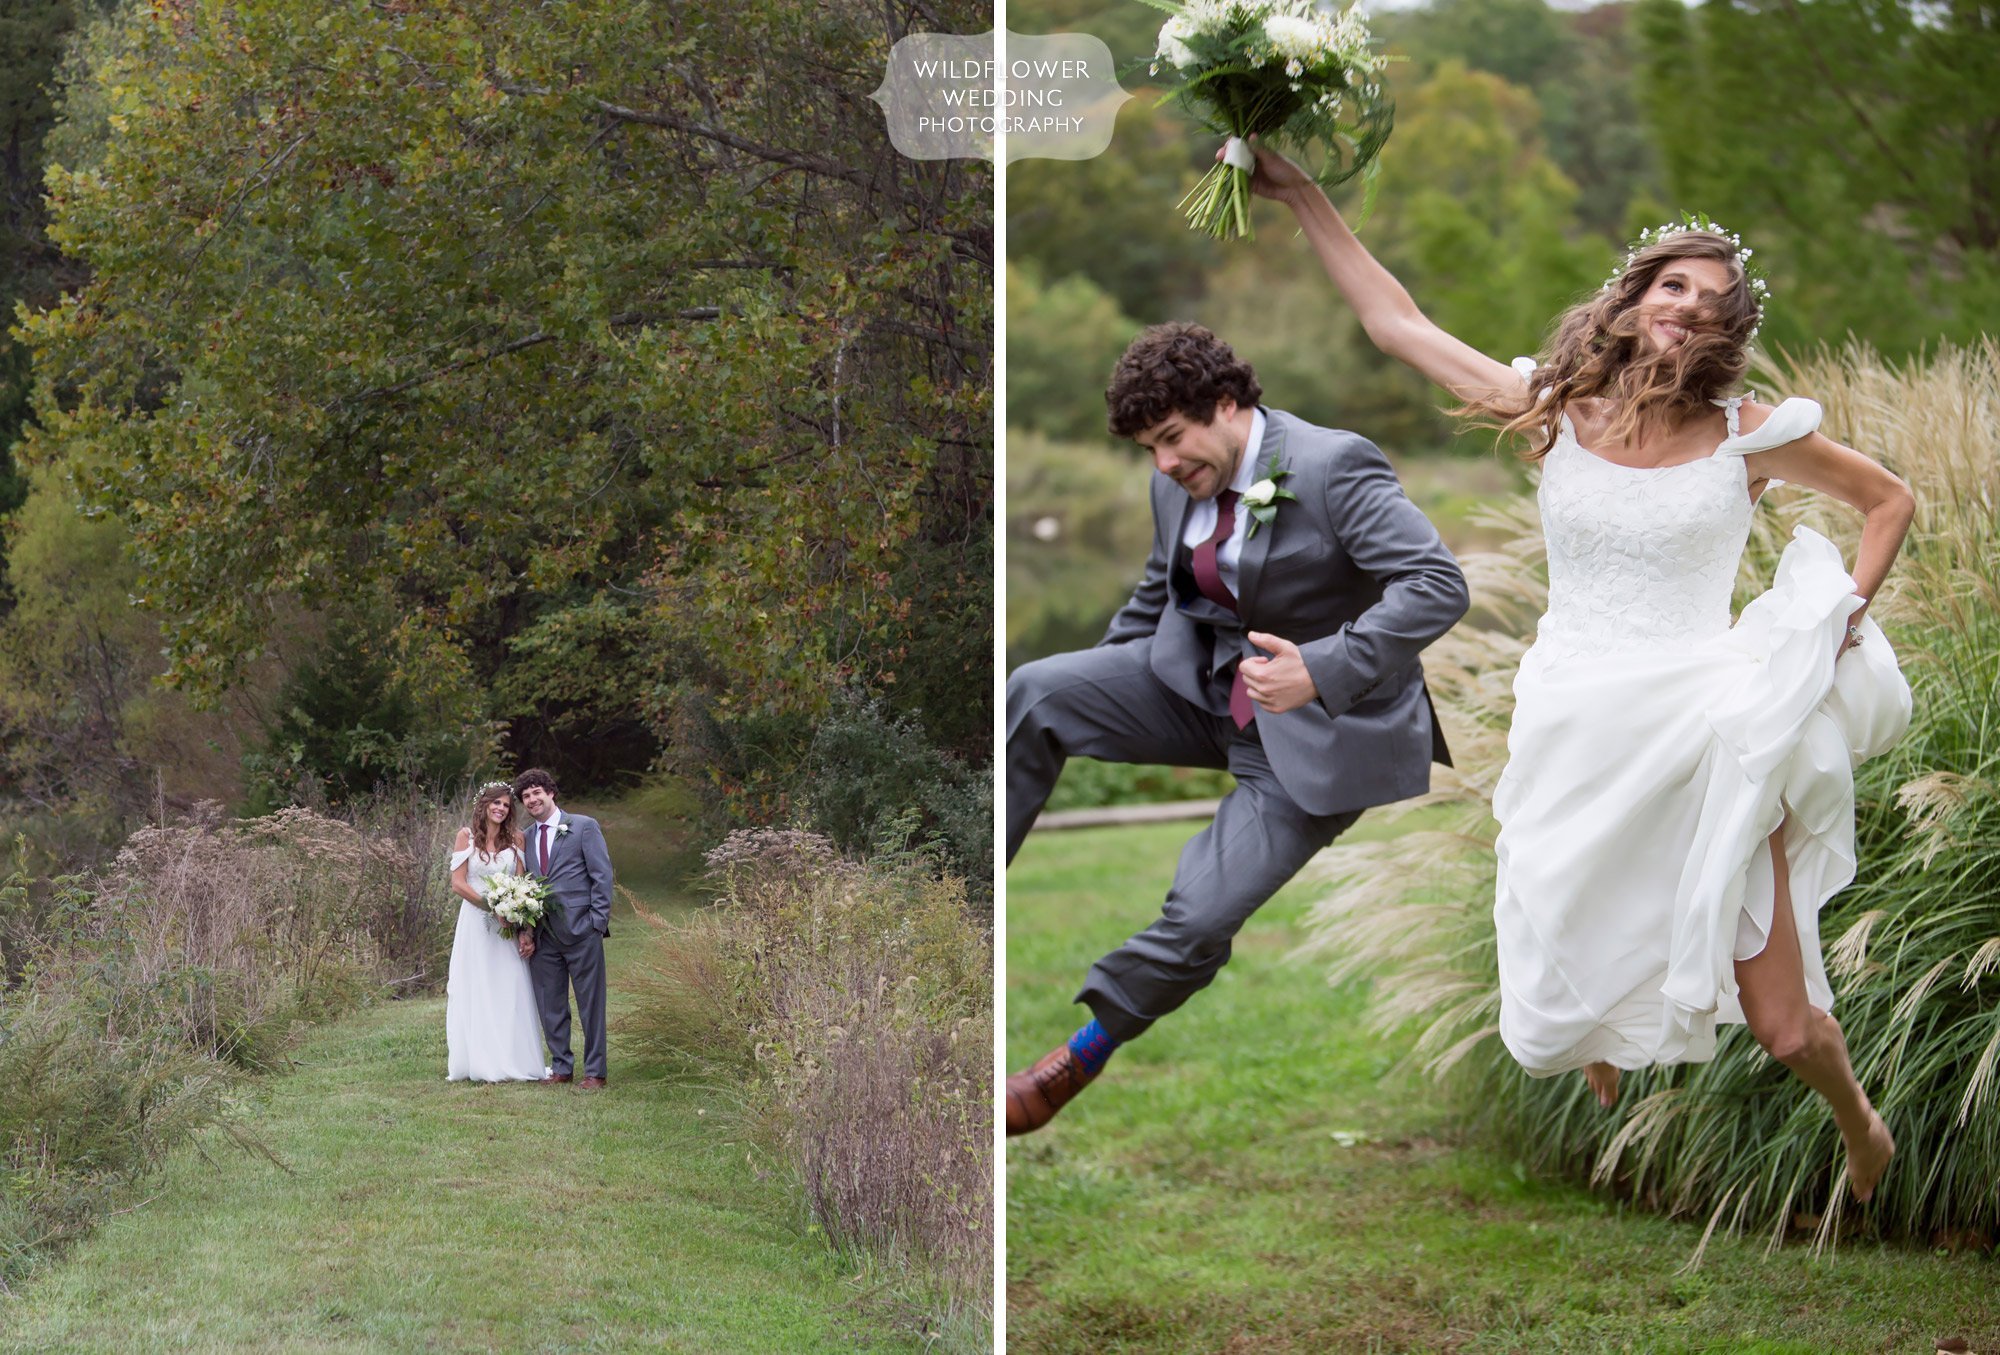 The bride clicks her heels as she jumps high in the air at the Little Piney Lodge.